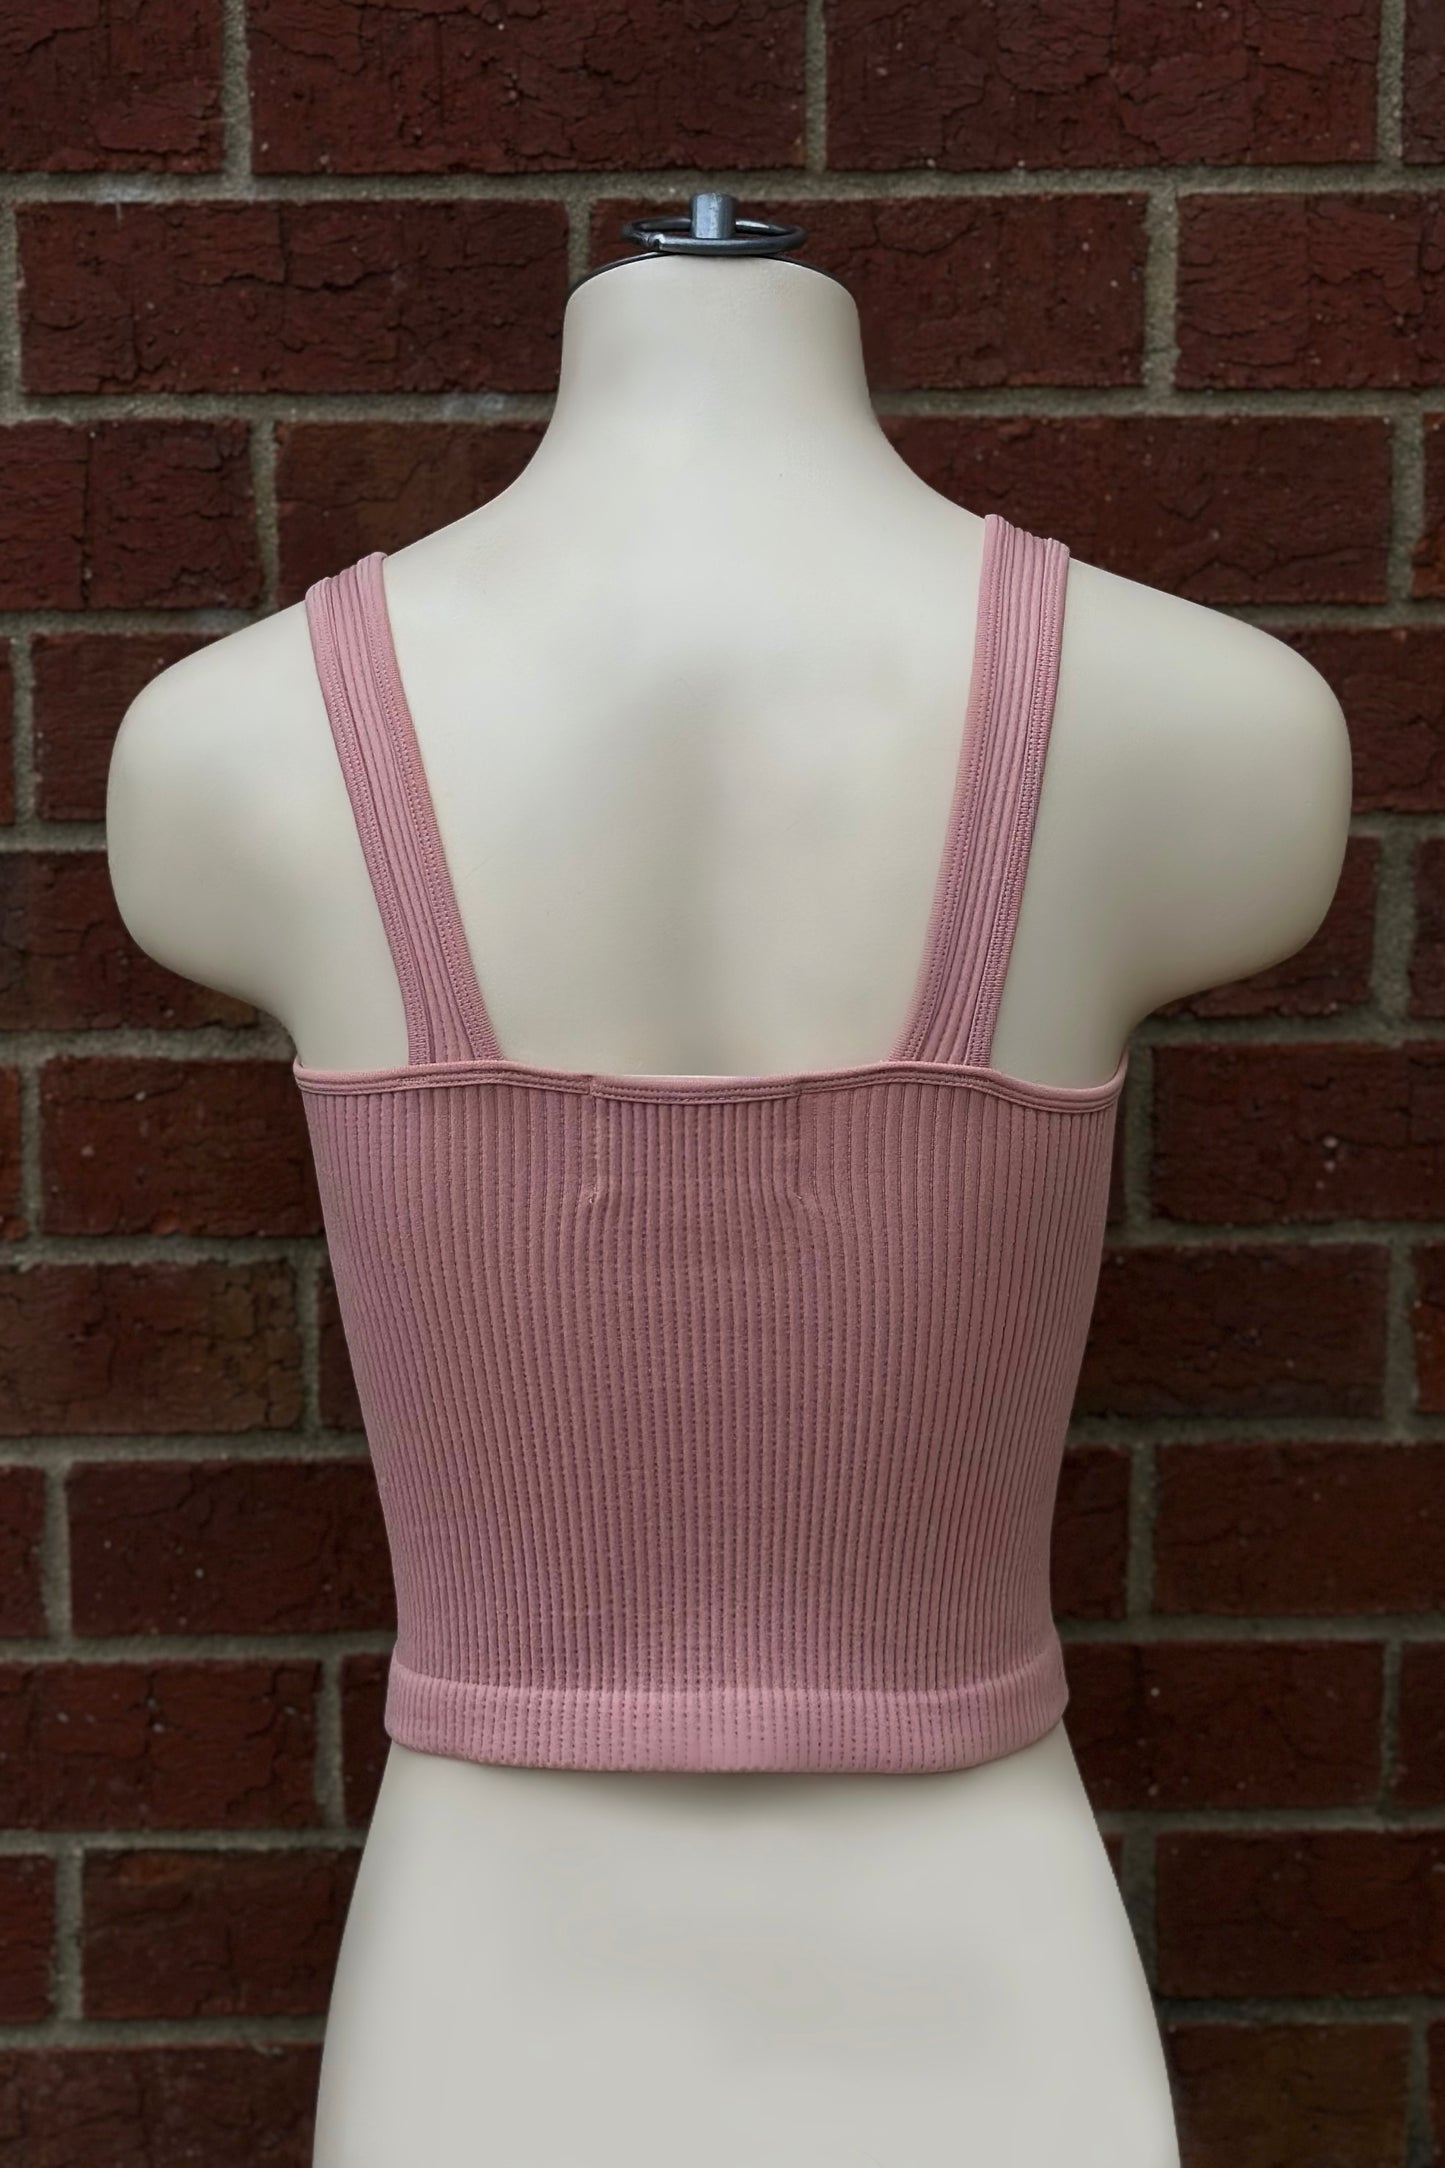 Load image into Gallery viewer, Spirited Basic Brami in Mauve Pink - SpiritedBoutiques Boho Hippie Boutique Style Tank, Dynamic Fashion
